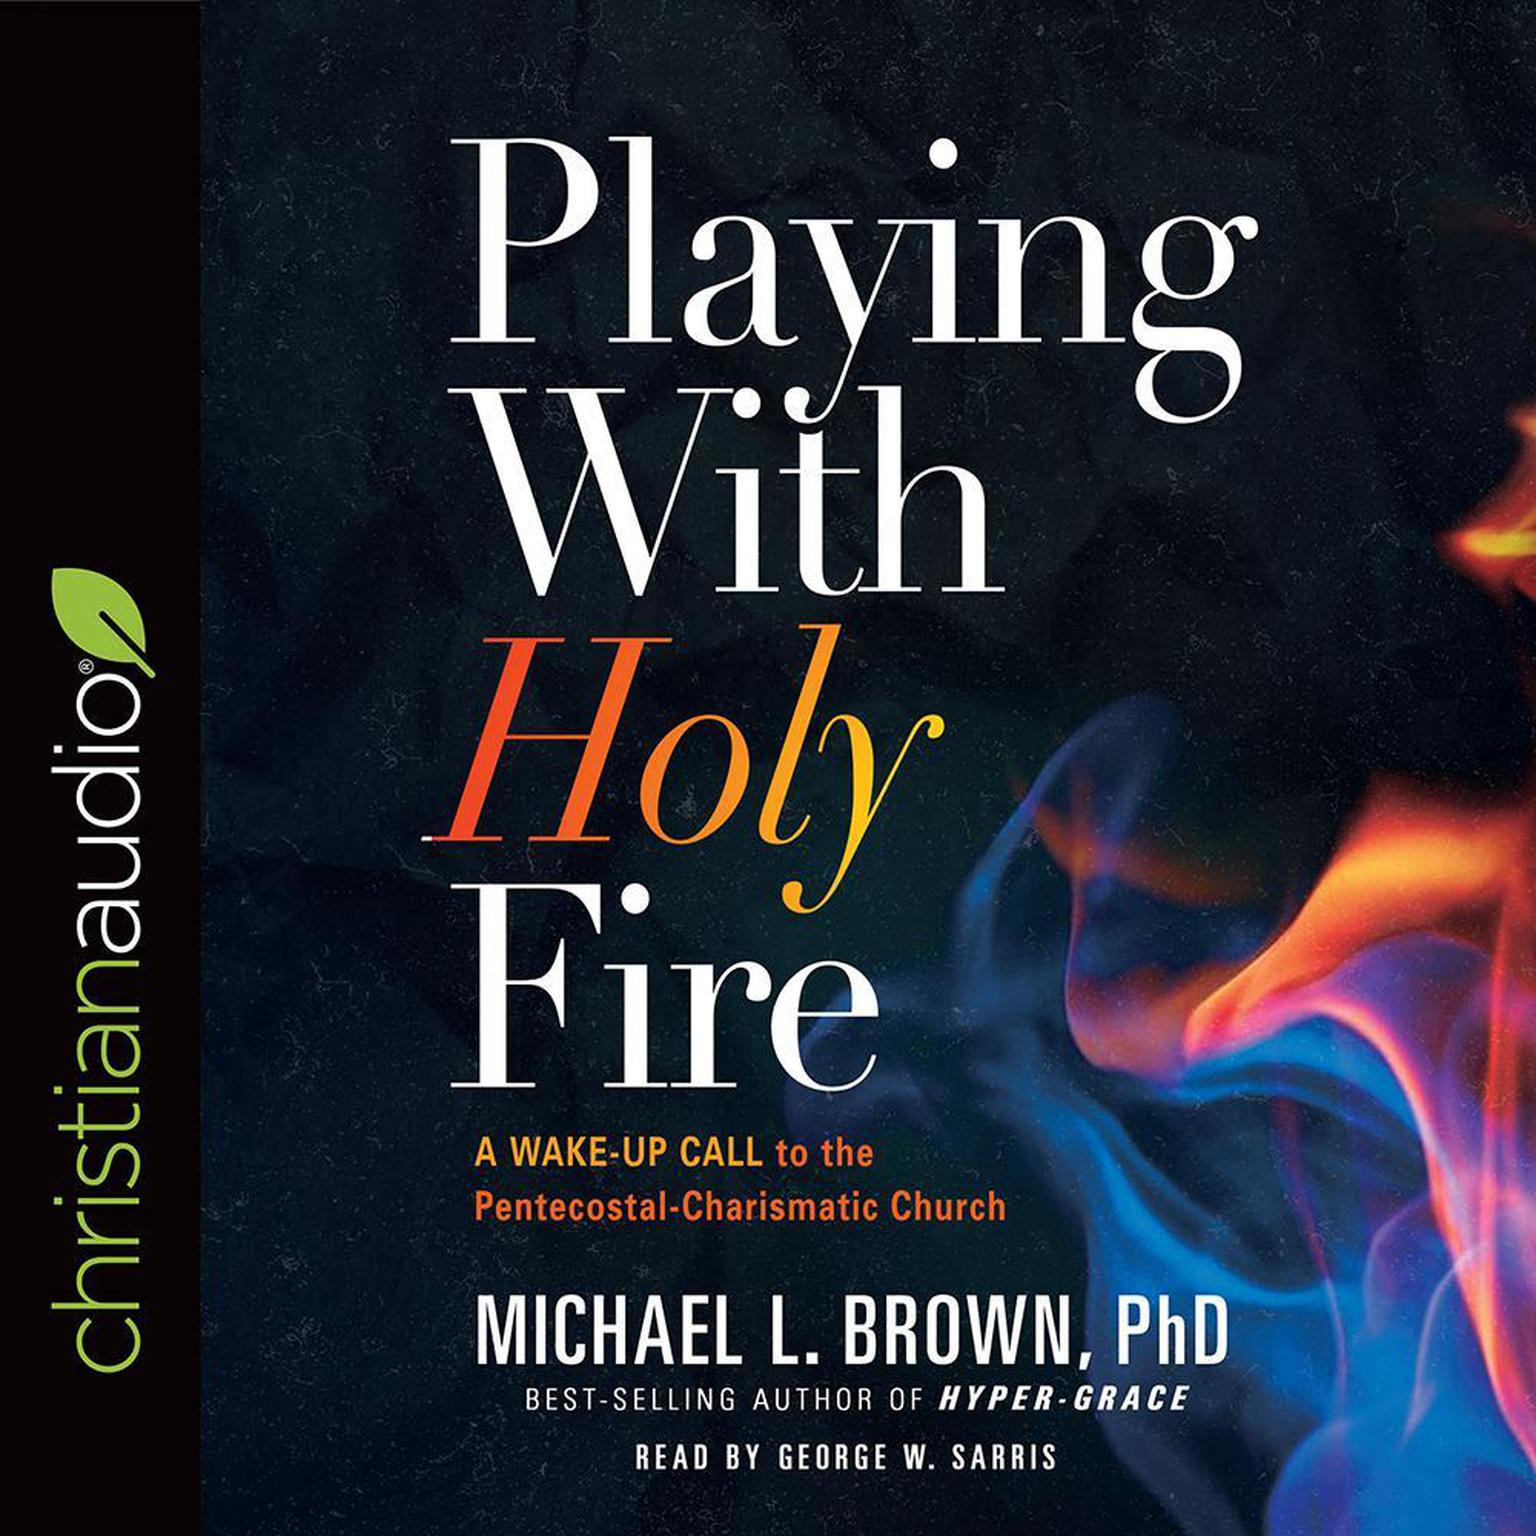 Playing With Holy Fire: A Wake-Up Call to the Pentecostal-Charismatic Church Audiobook, by Michael L. Brown